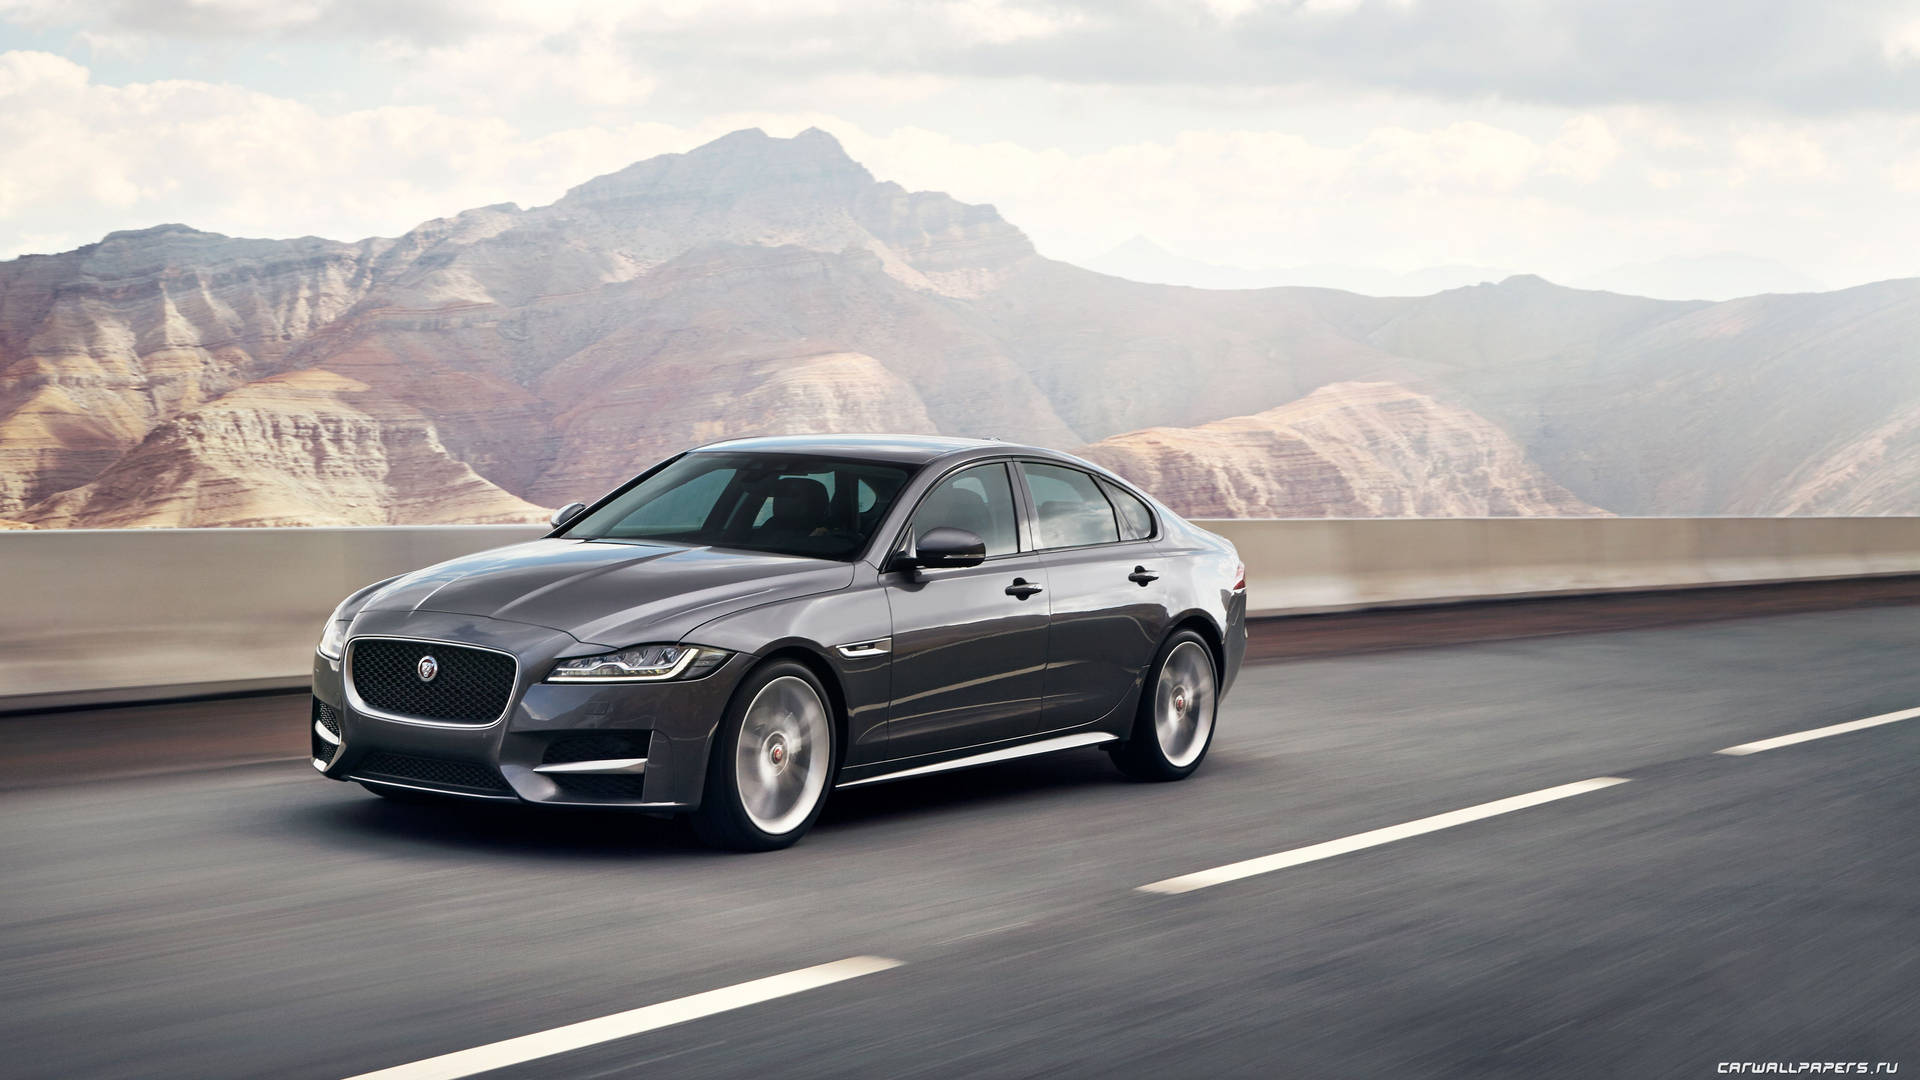 Cruising The Road In Style In A Grey Jaguar